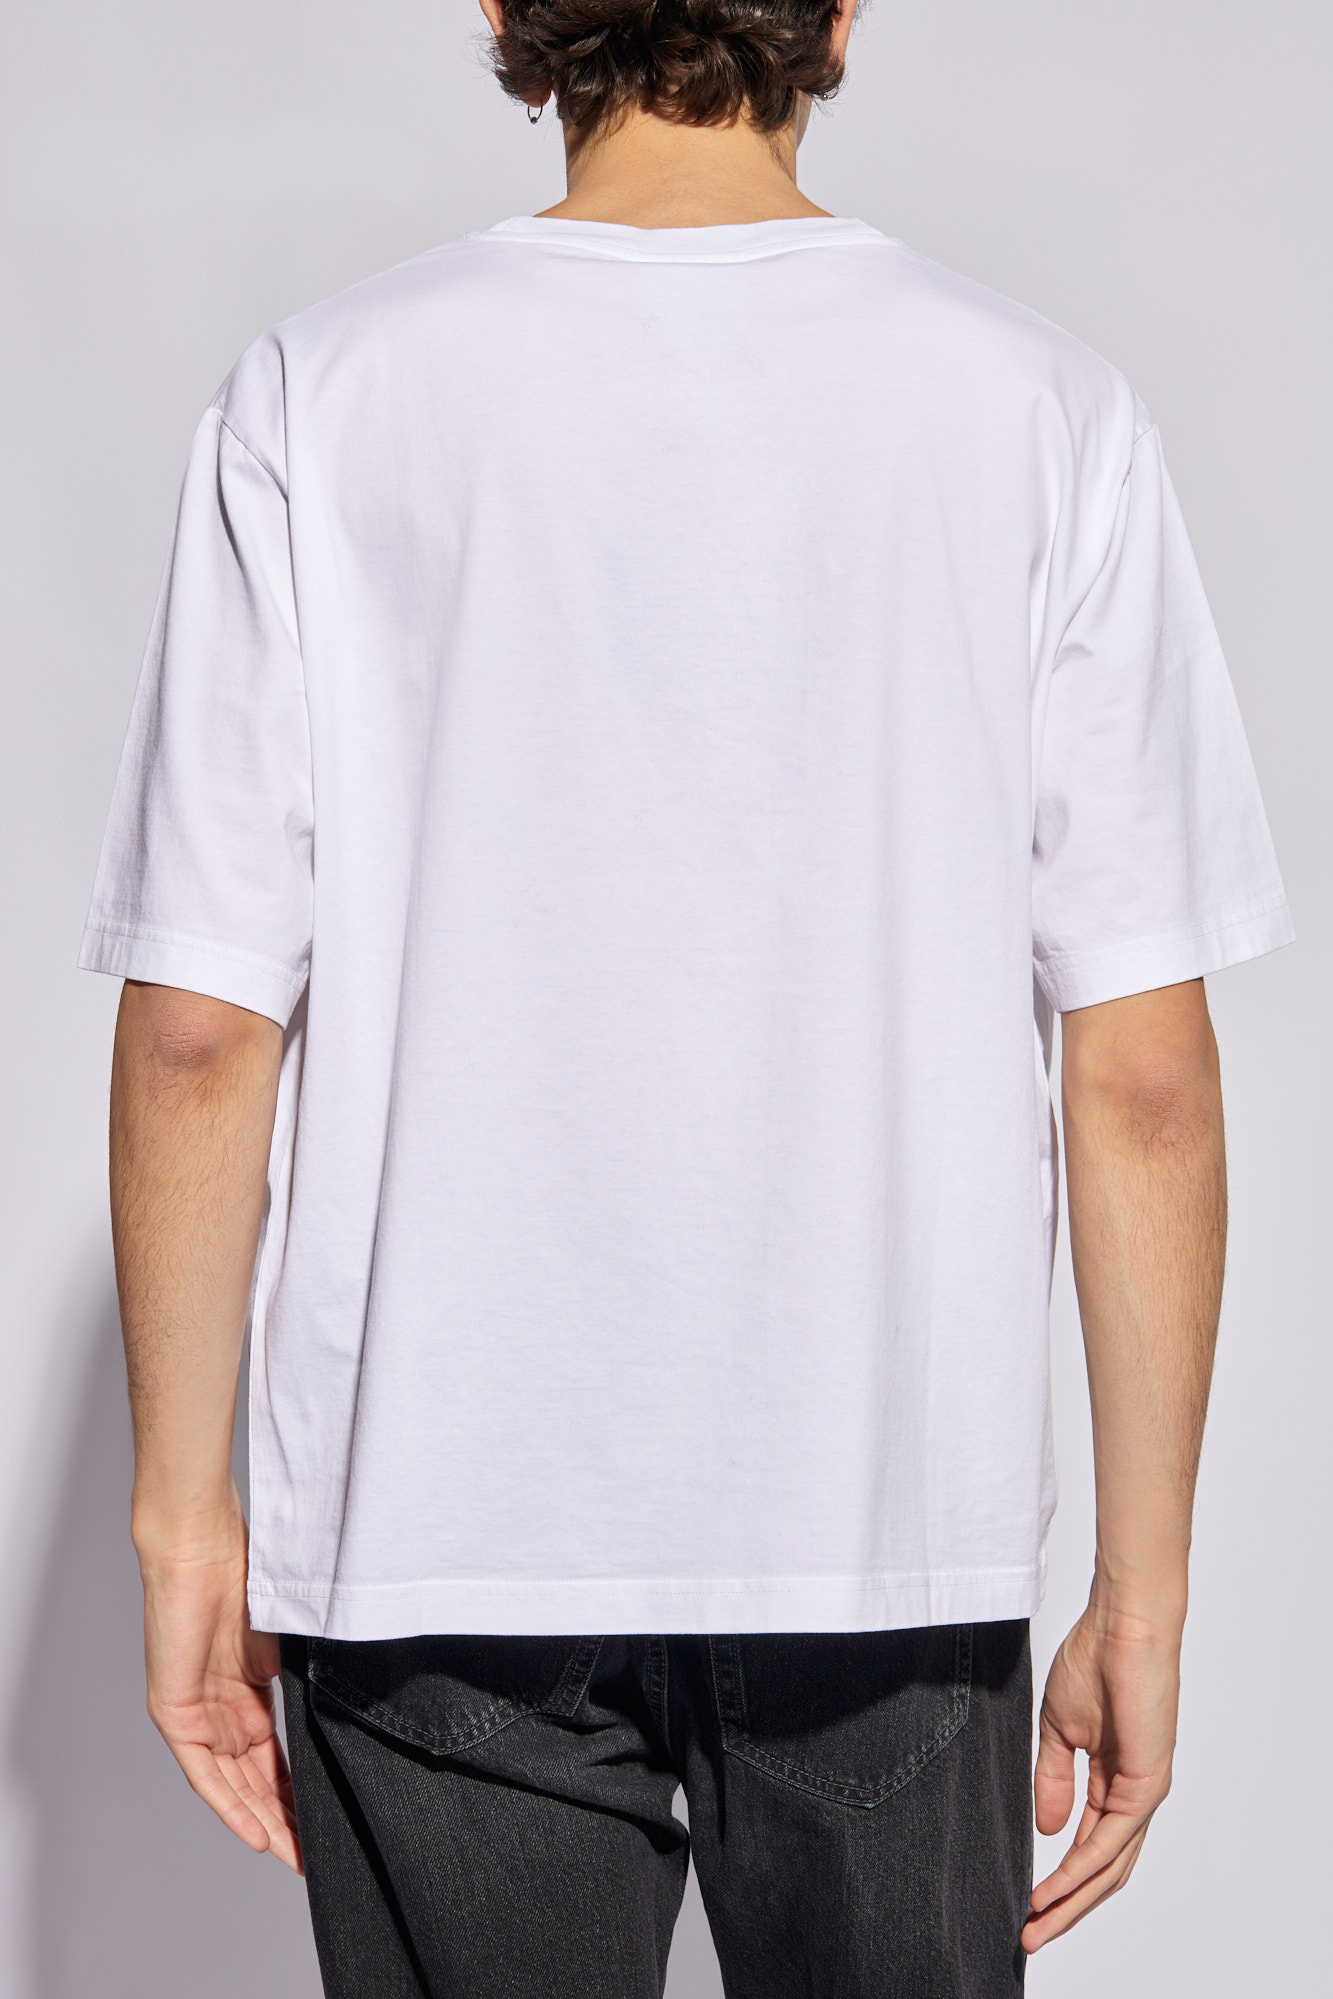 Acne Studios embroidered birds T-shirt